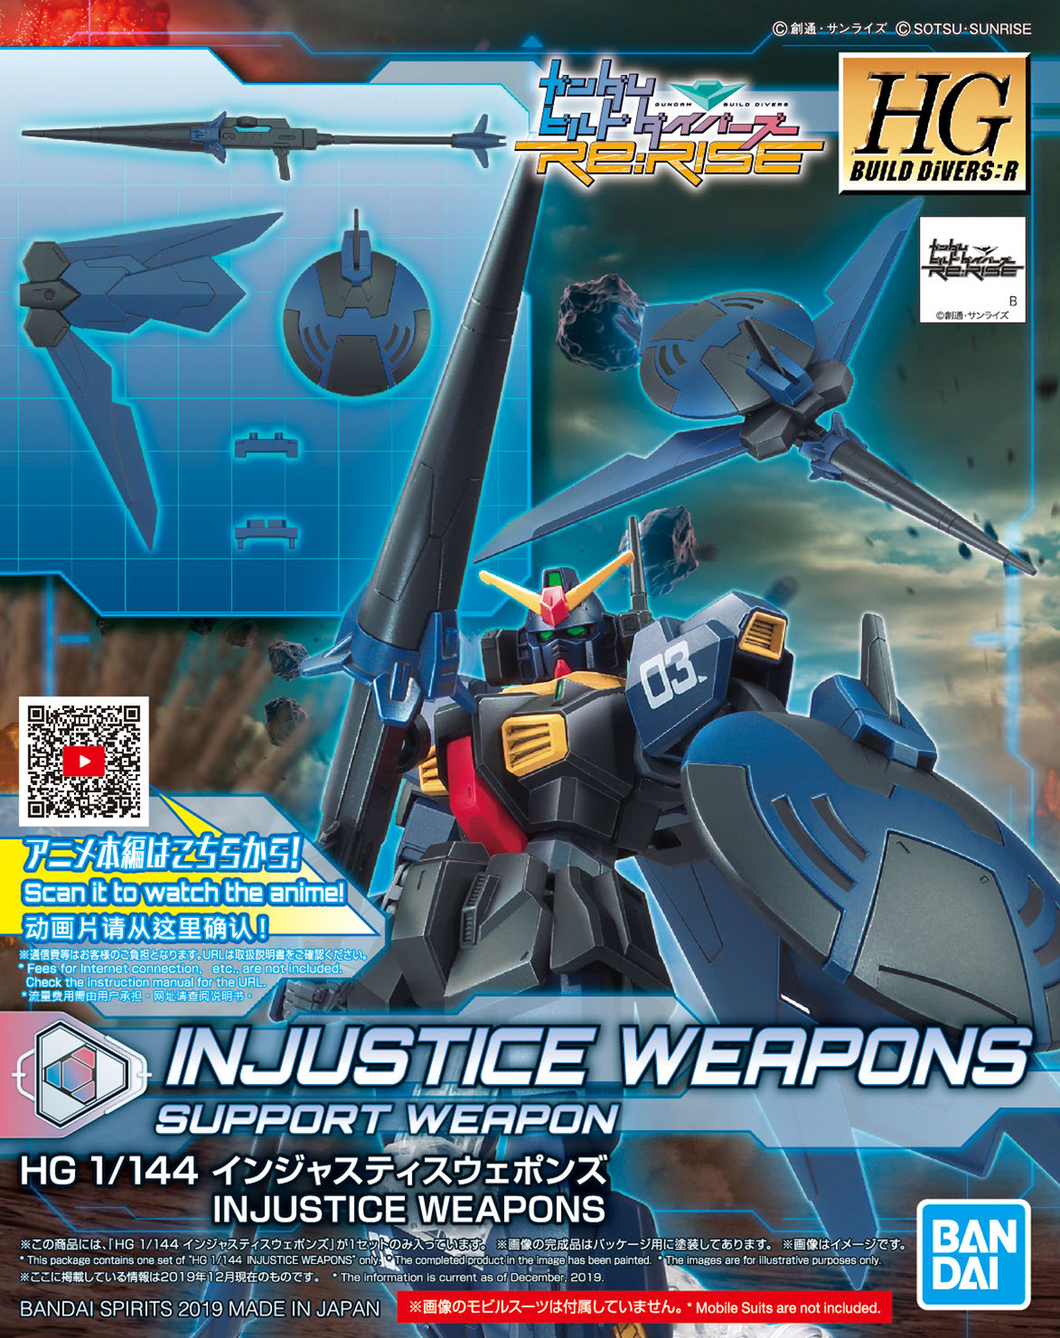 1/144 HGBD:R Injustice Weapons